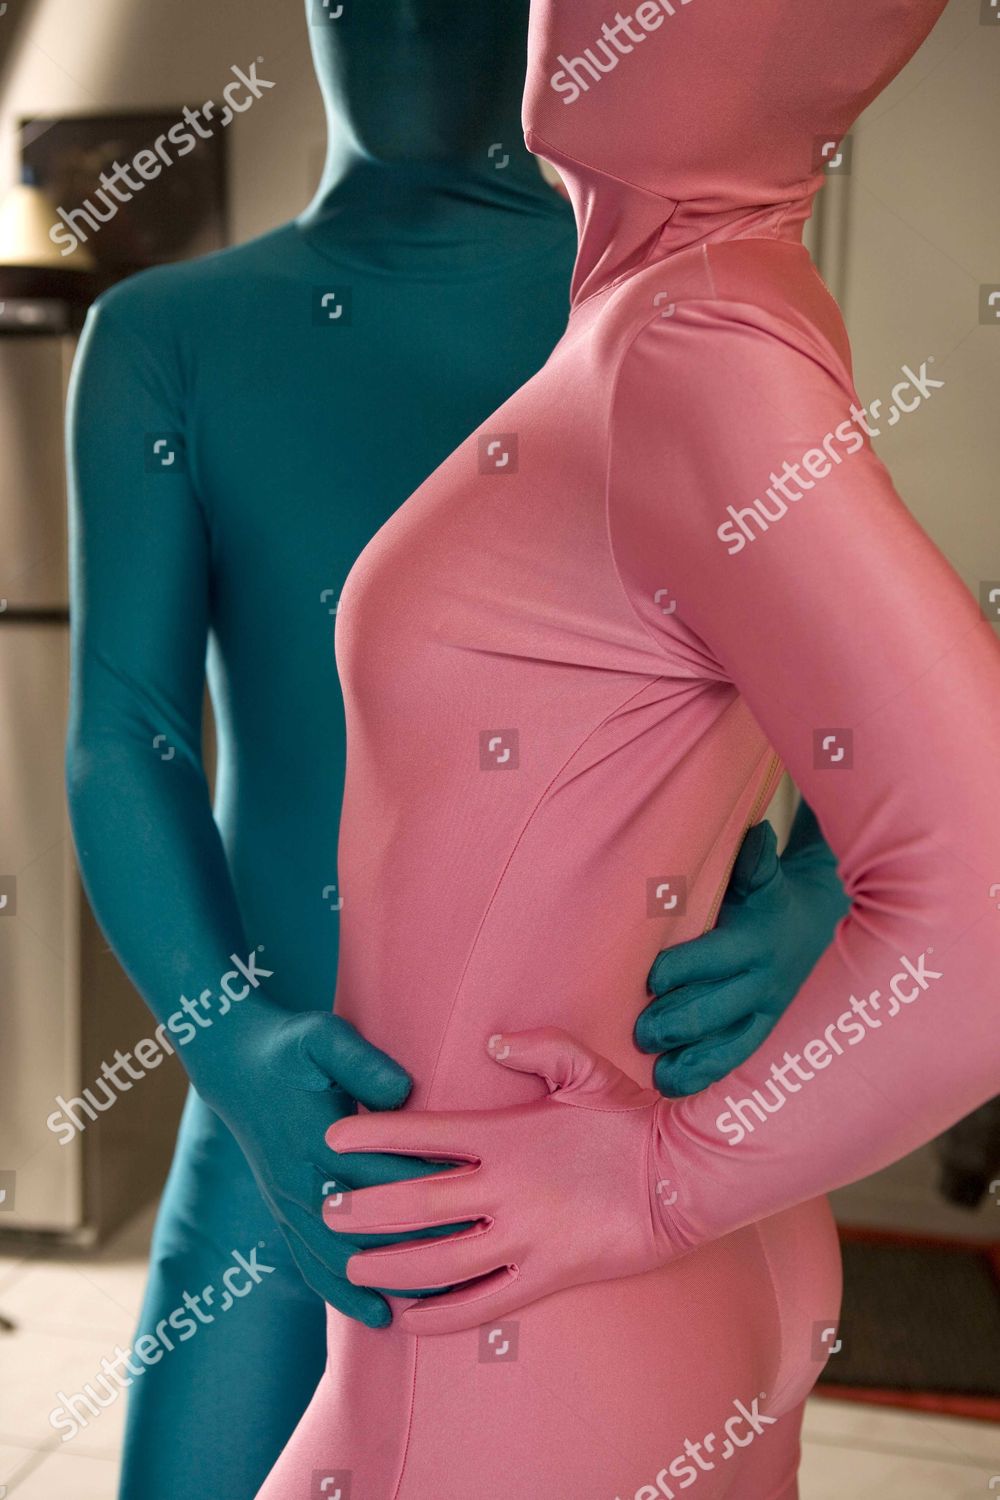 Zentai Enthusiasts Suited Zentai Garment Usually Editorial Stock Photo Stock Image Shutterstock